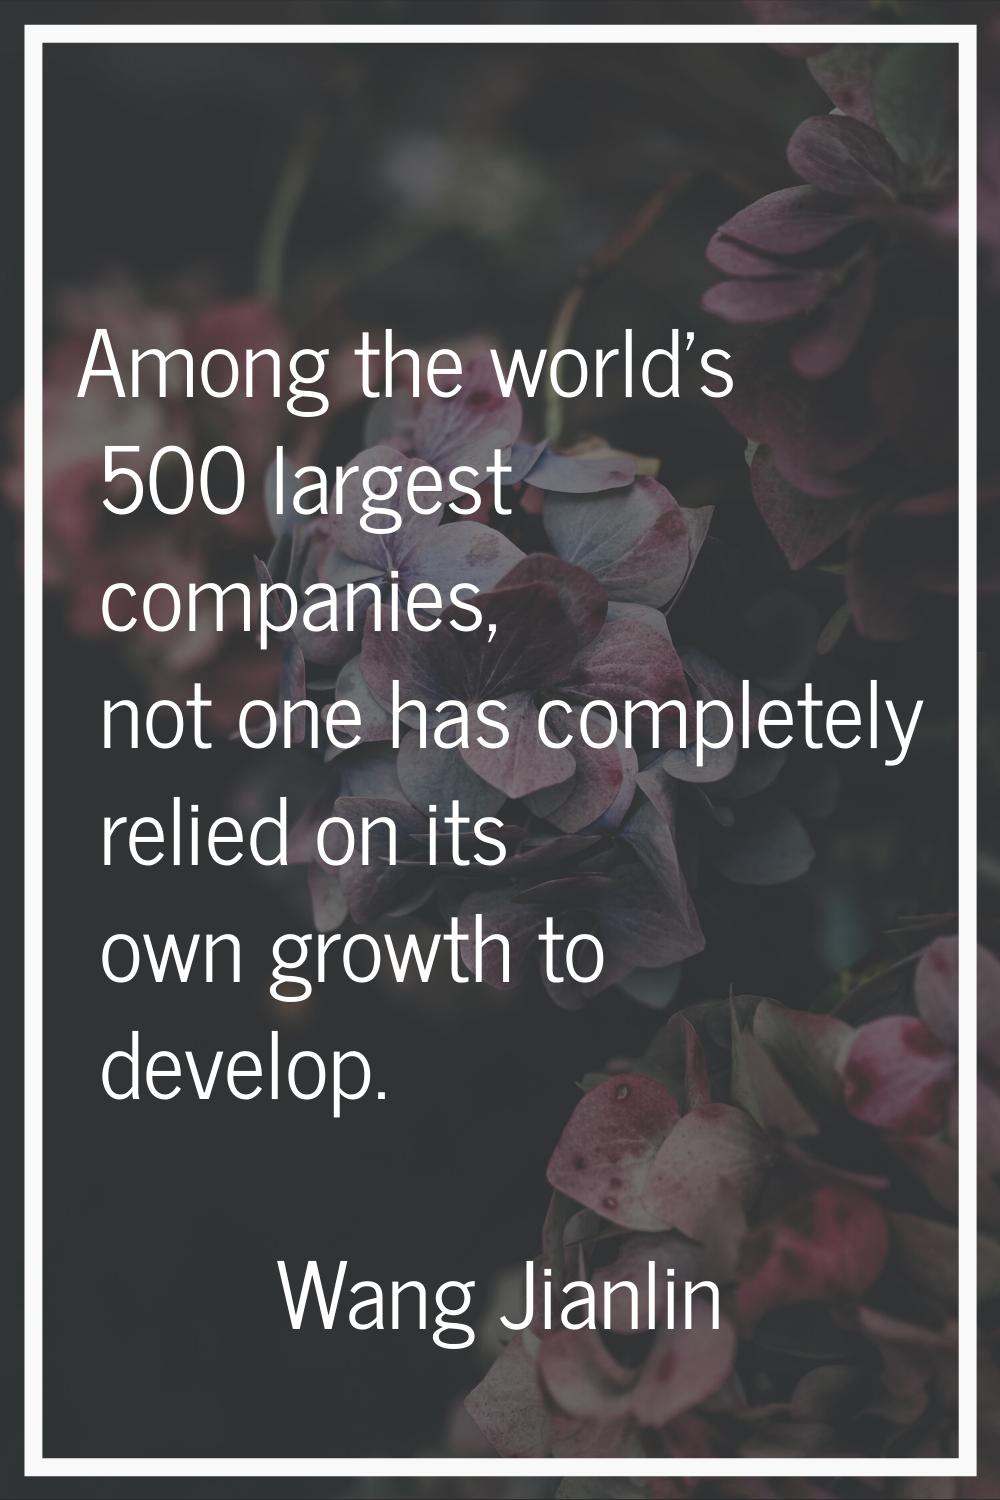 Among the world's 500 largest companies, not one has completely relied on its own growth to develop